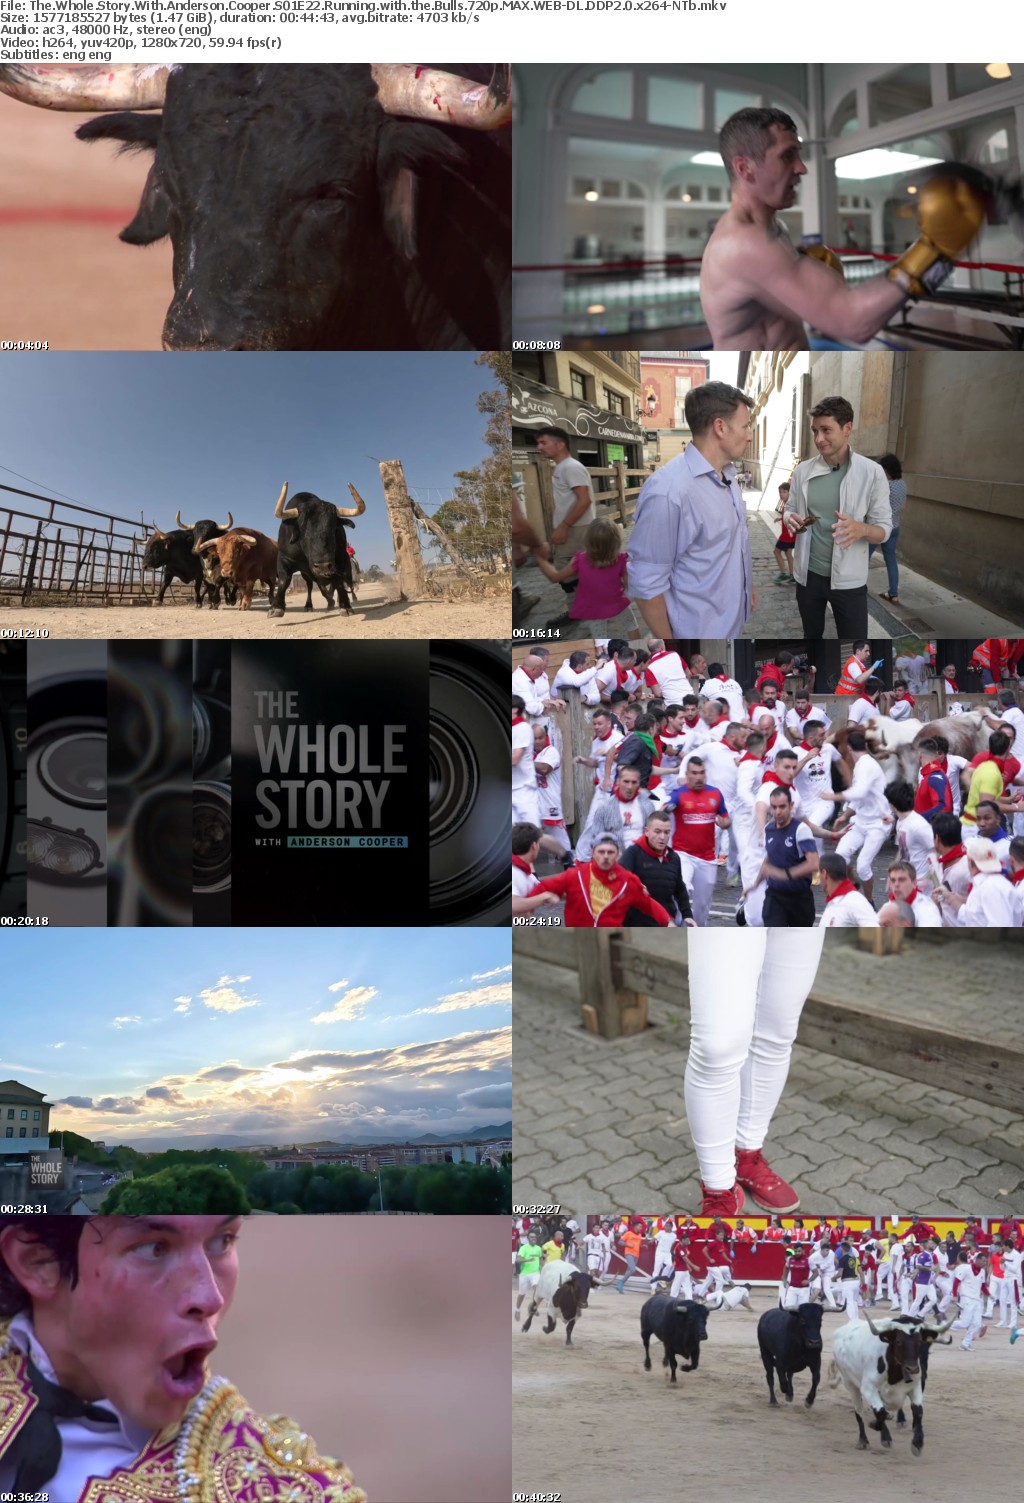 The Whole Story With Anderson Cooper S01E22 Running with the Bulls 720p MAX WEB-DL DDP2 0 x264-NTb